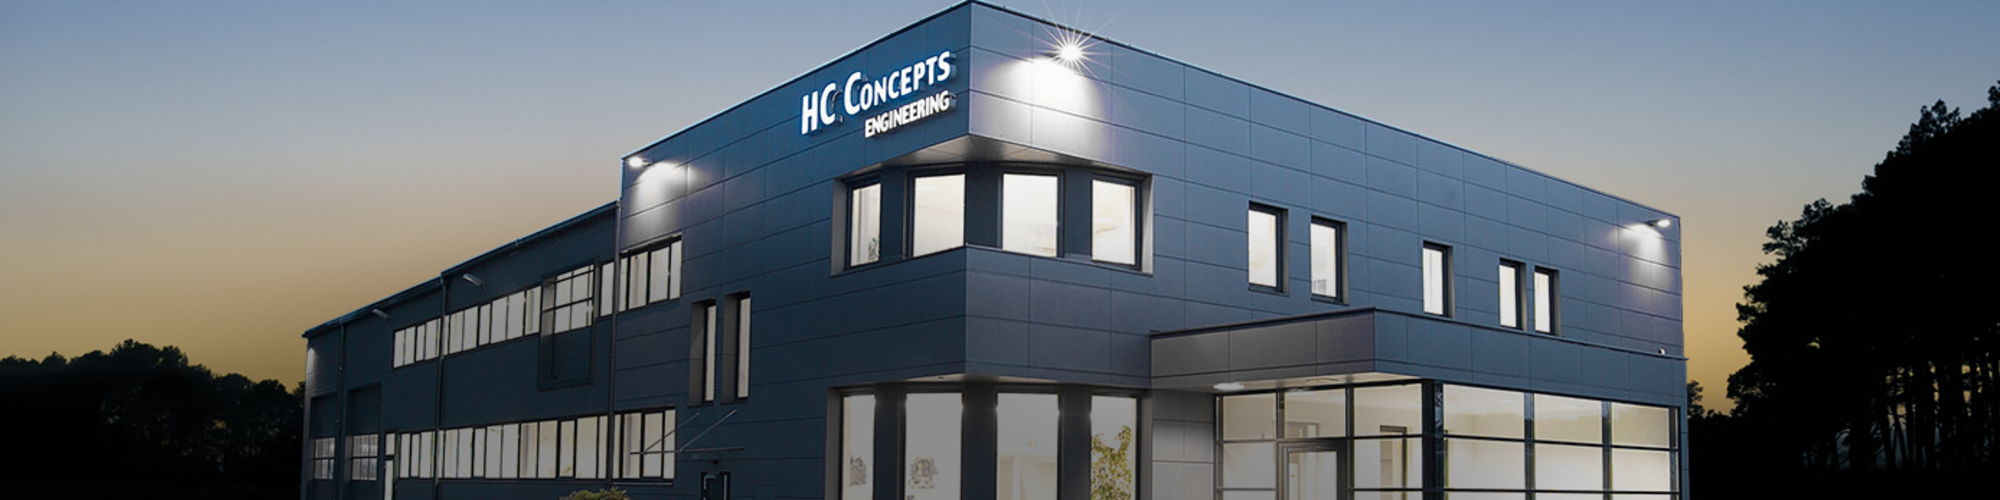 HC-Concepts Engineering GmbH cover image